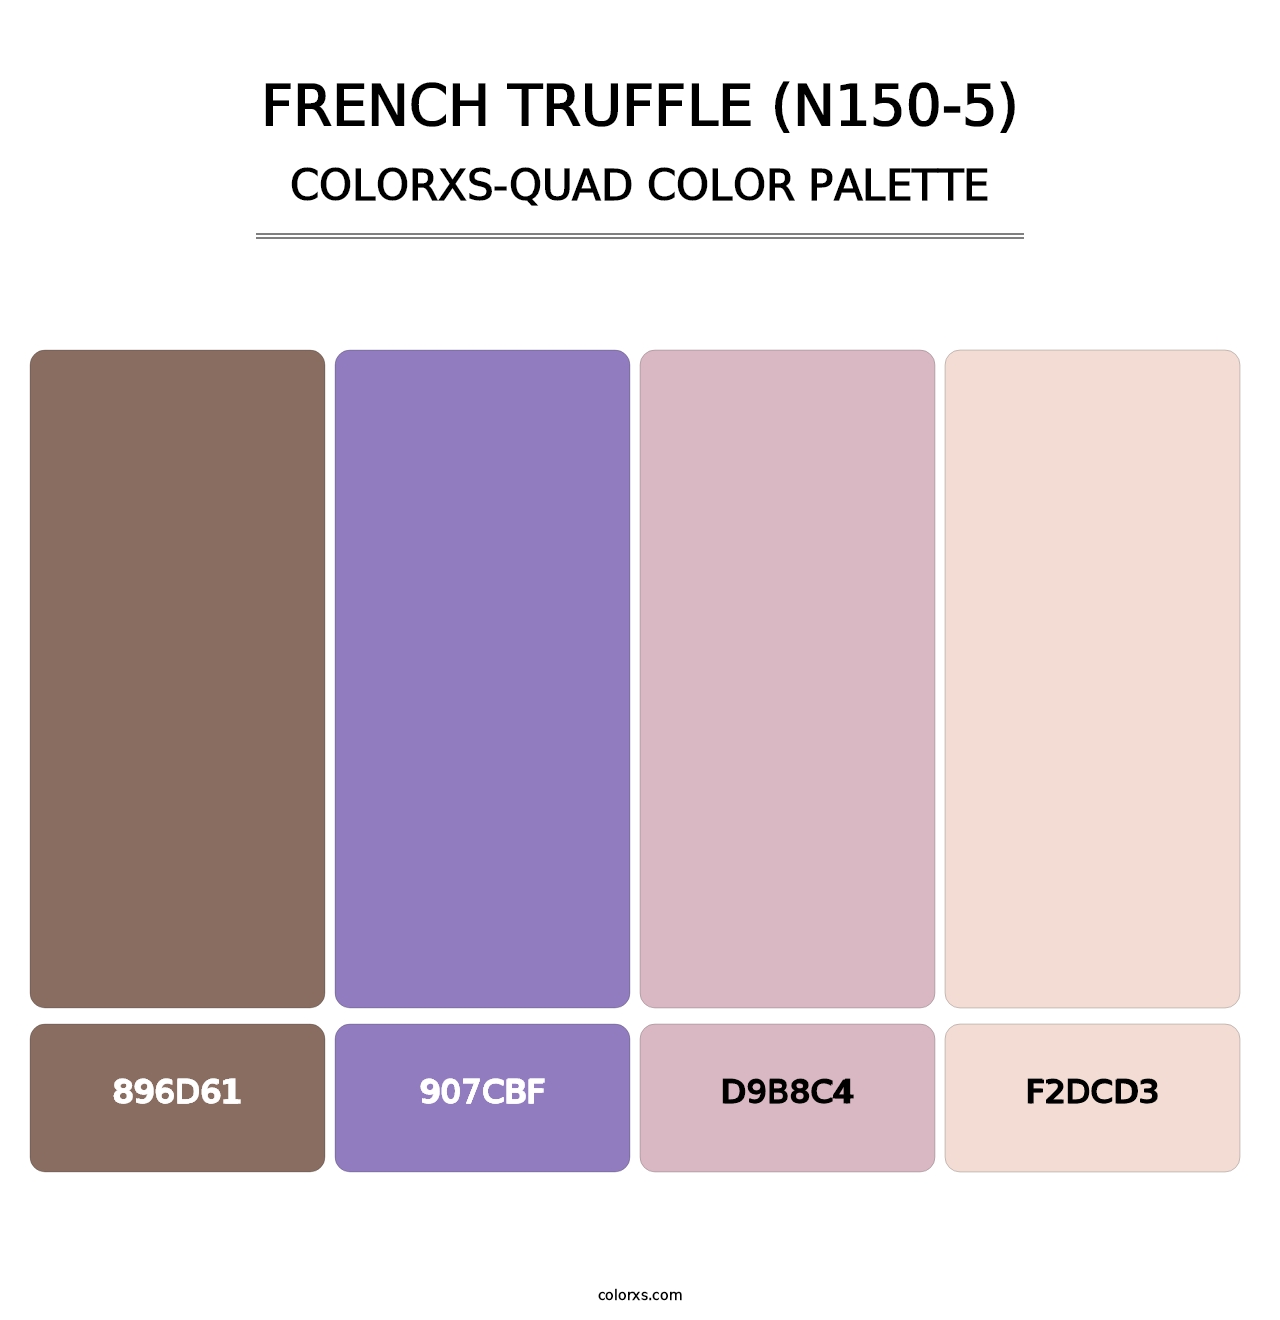 French Truffle (N150-5) - Colorxs Quad Palette